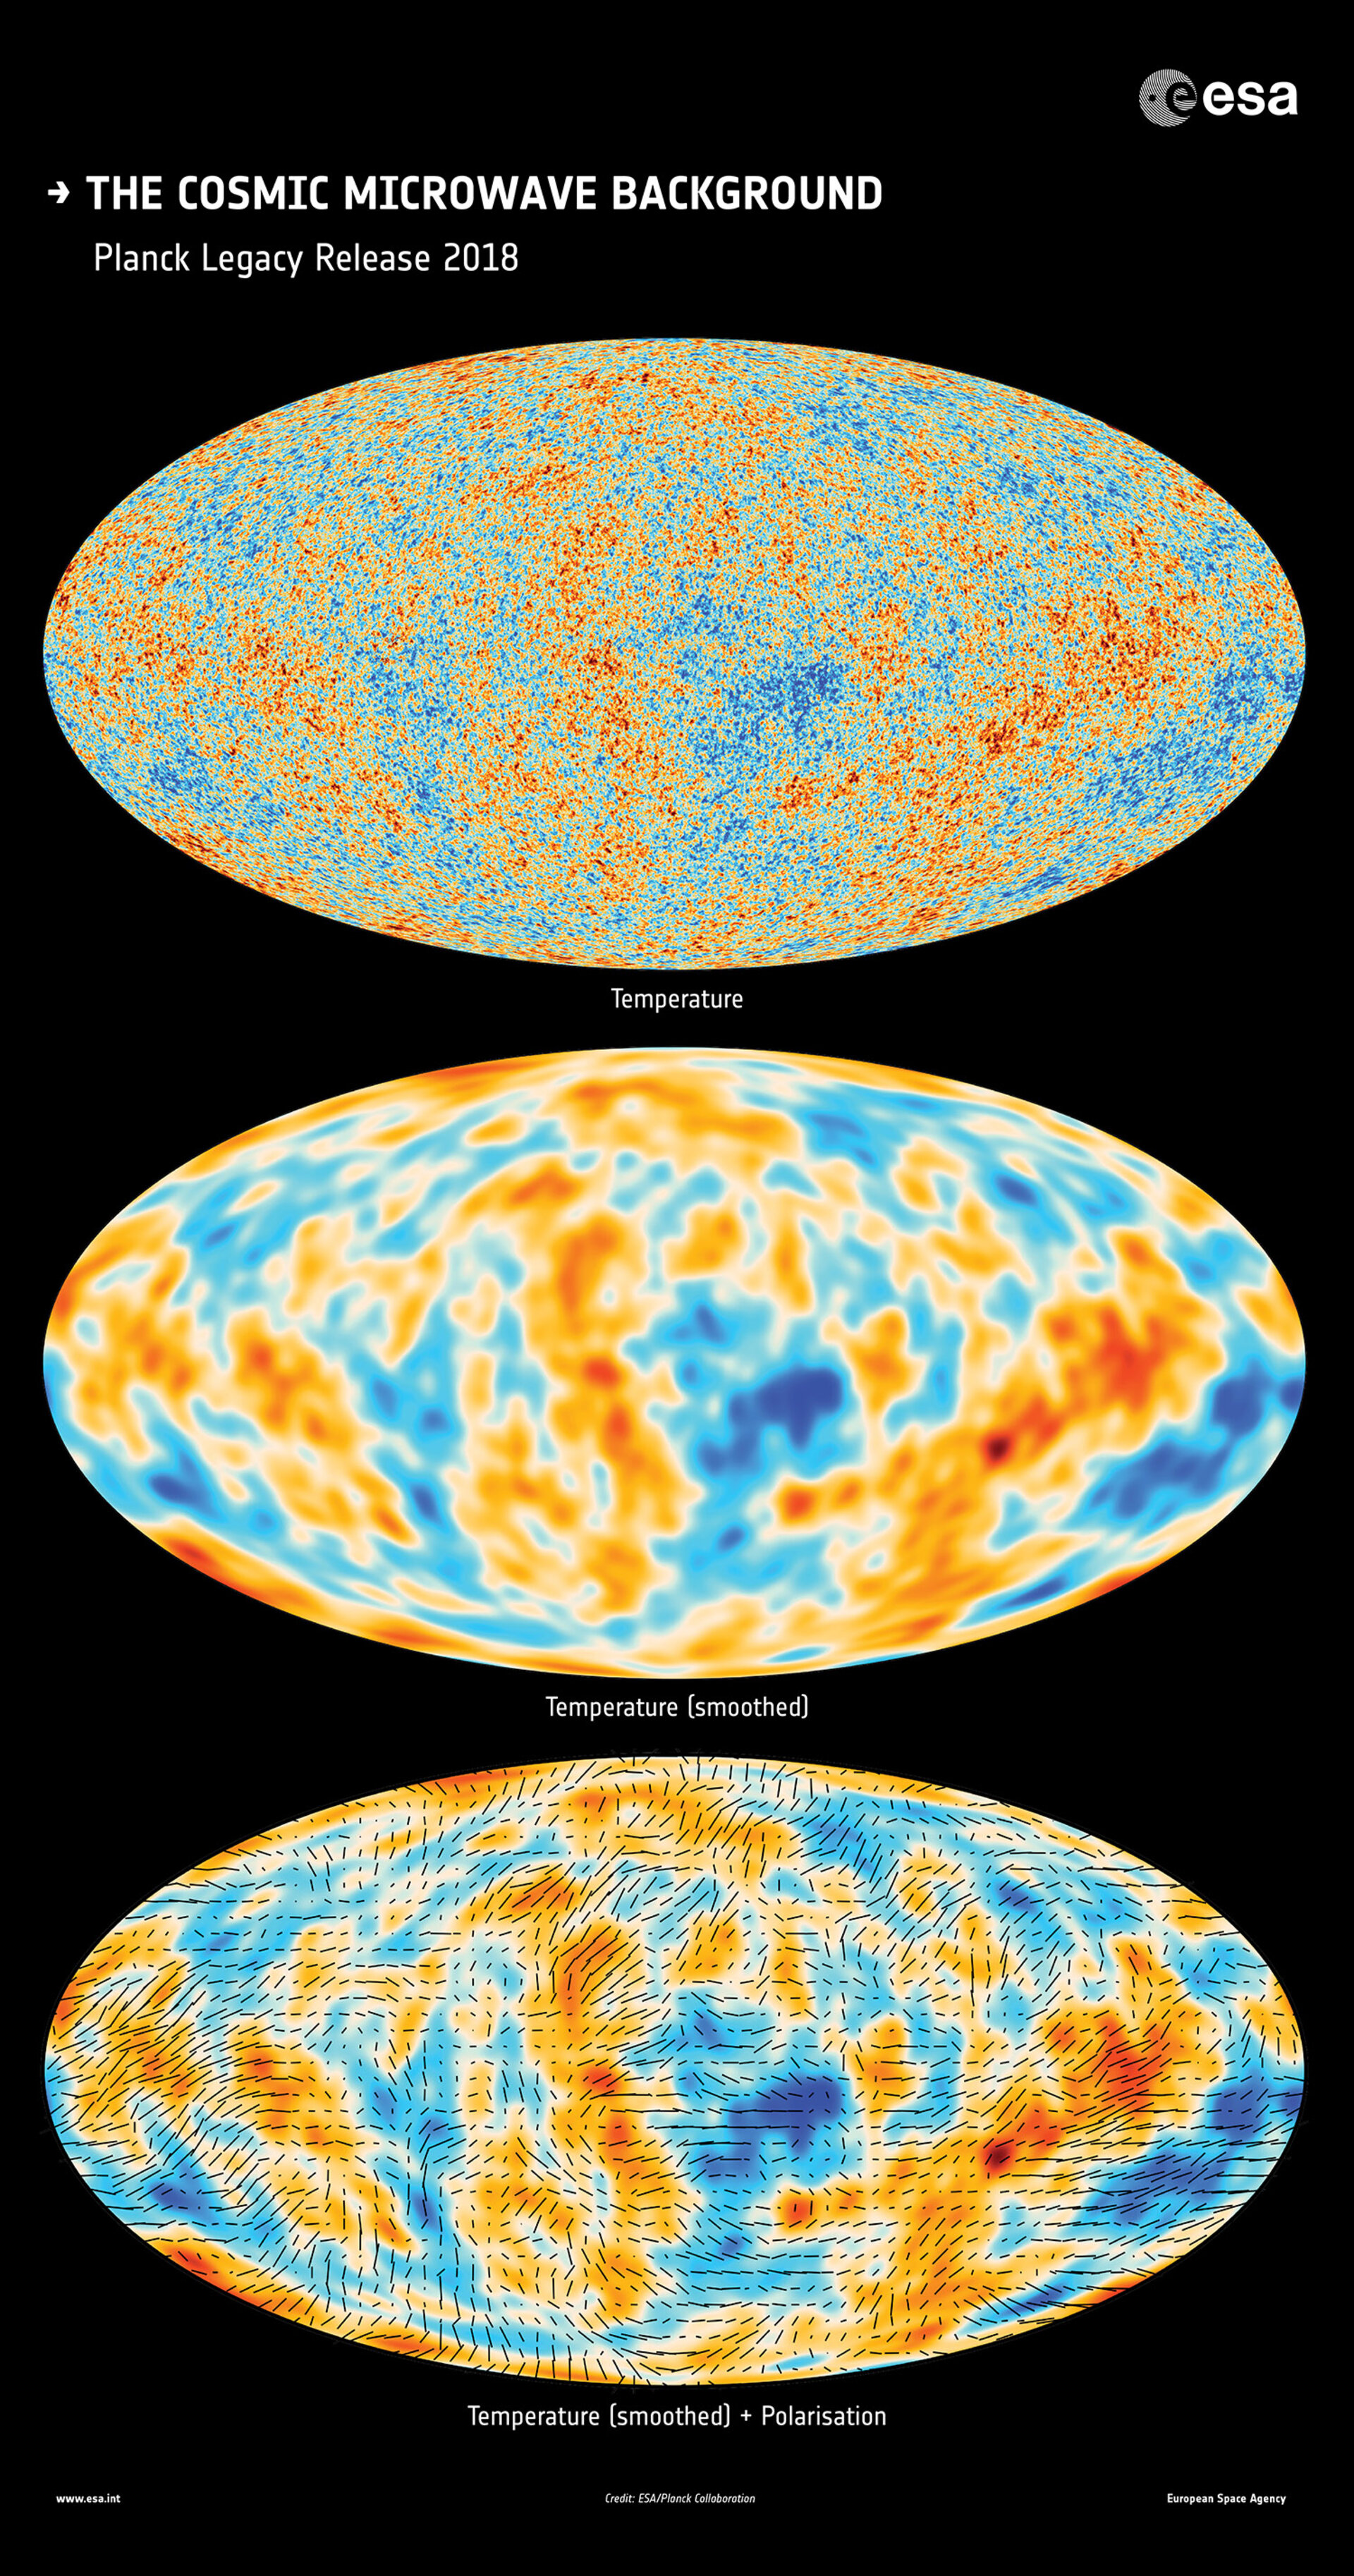 The Cosmic Microwave Background: temperature and polarisation